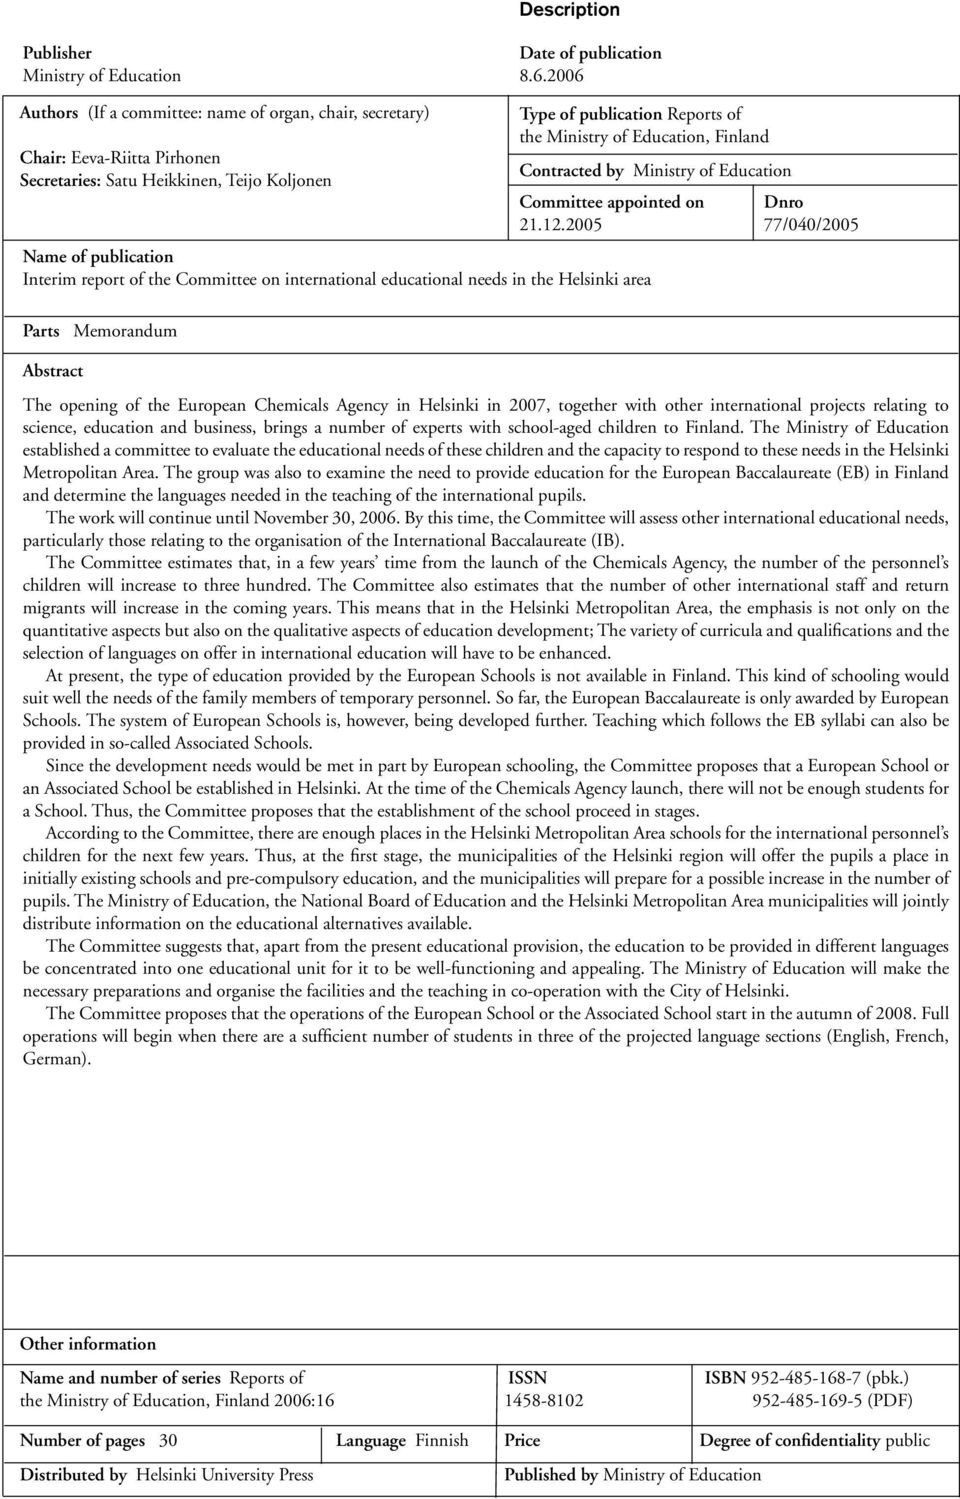 international educational needs in the Helsinki area Parts Memorandum Abstract Type of publication Reports of the Ministry of Education, Finland Contracted by Ministry of Education Committee